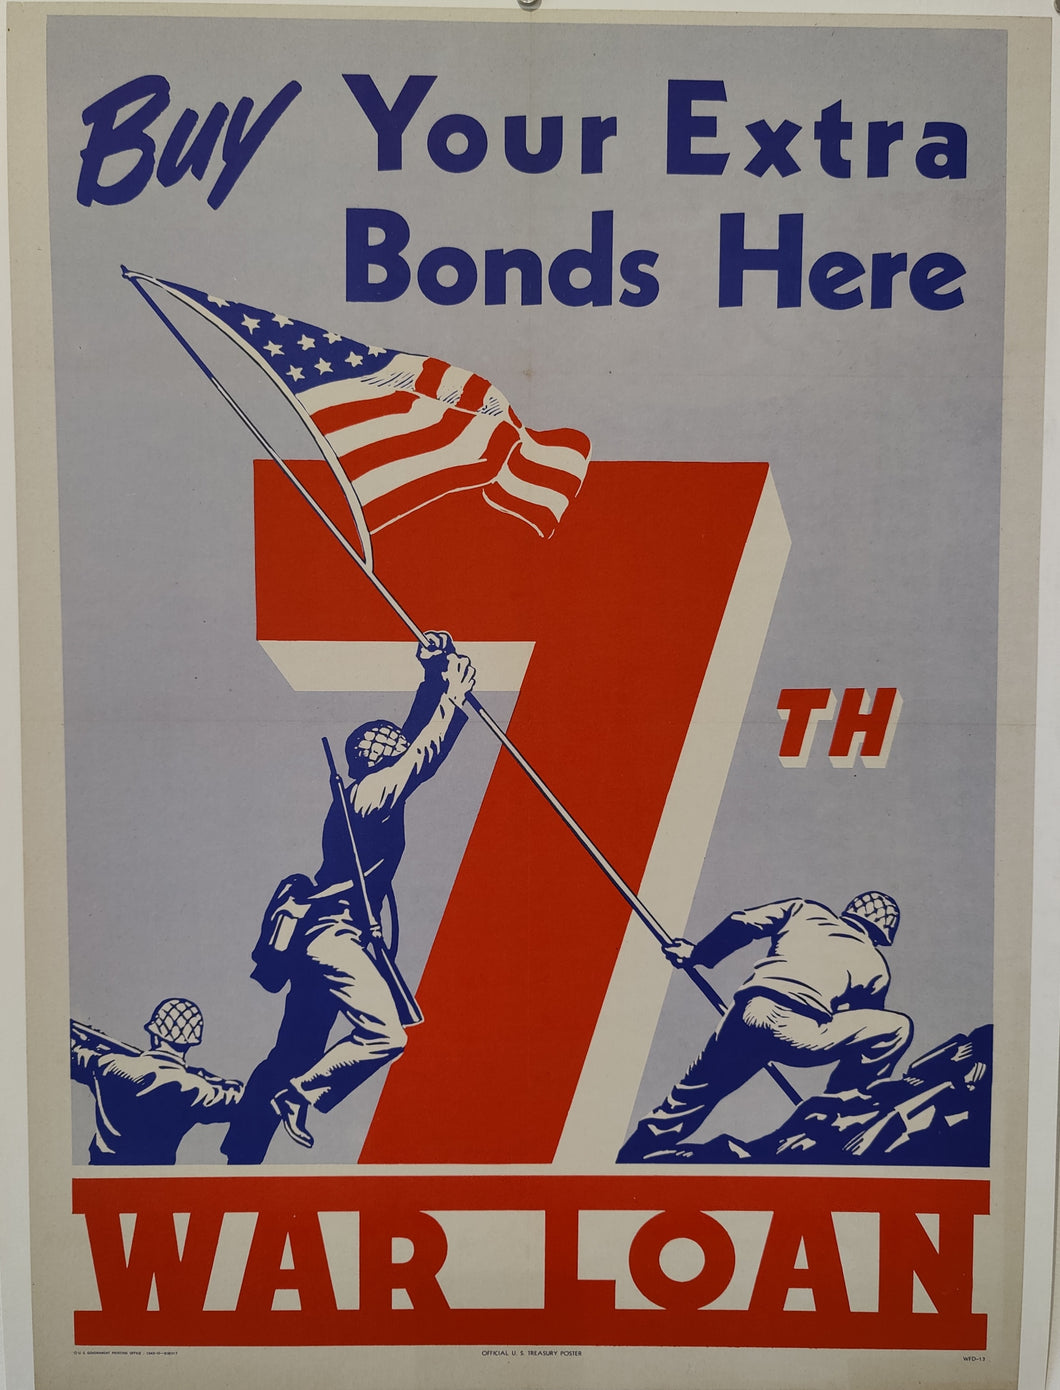 Buy Your Extra Bonds Here - 7th War Loan